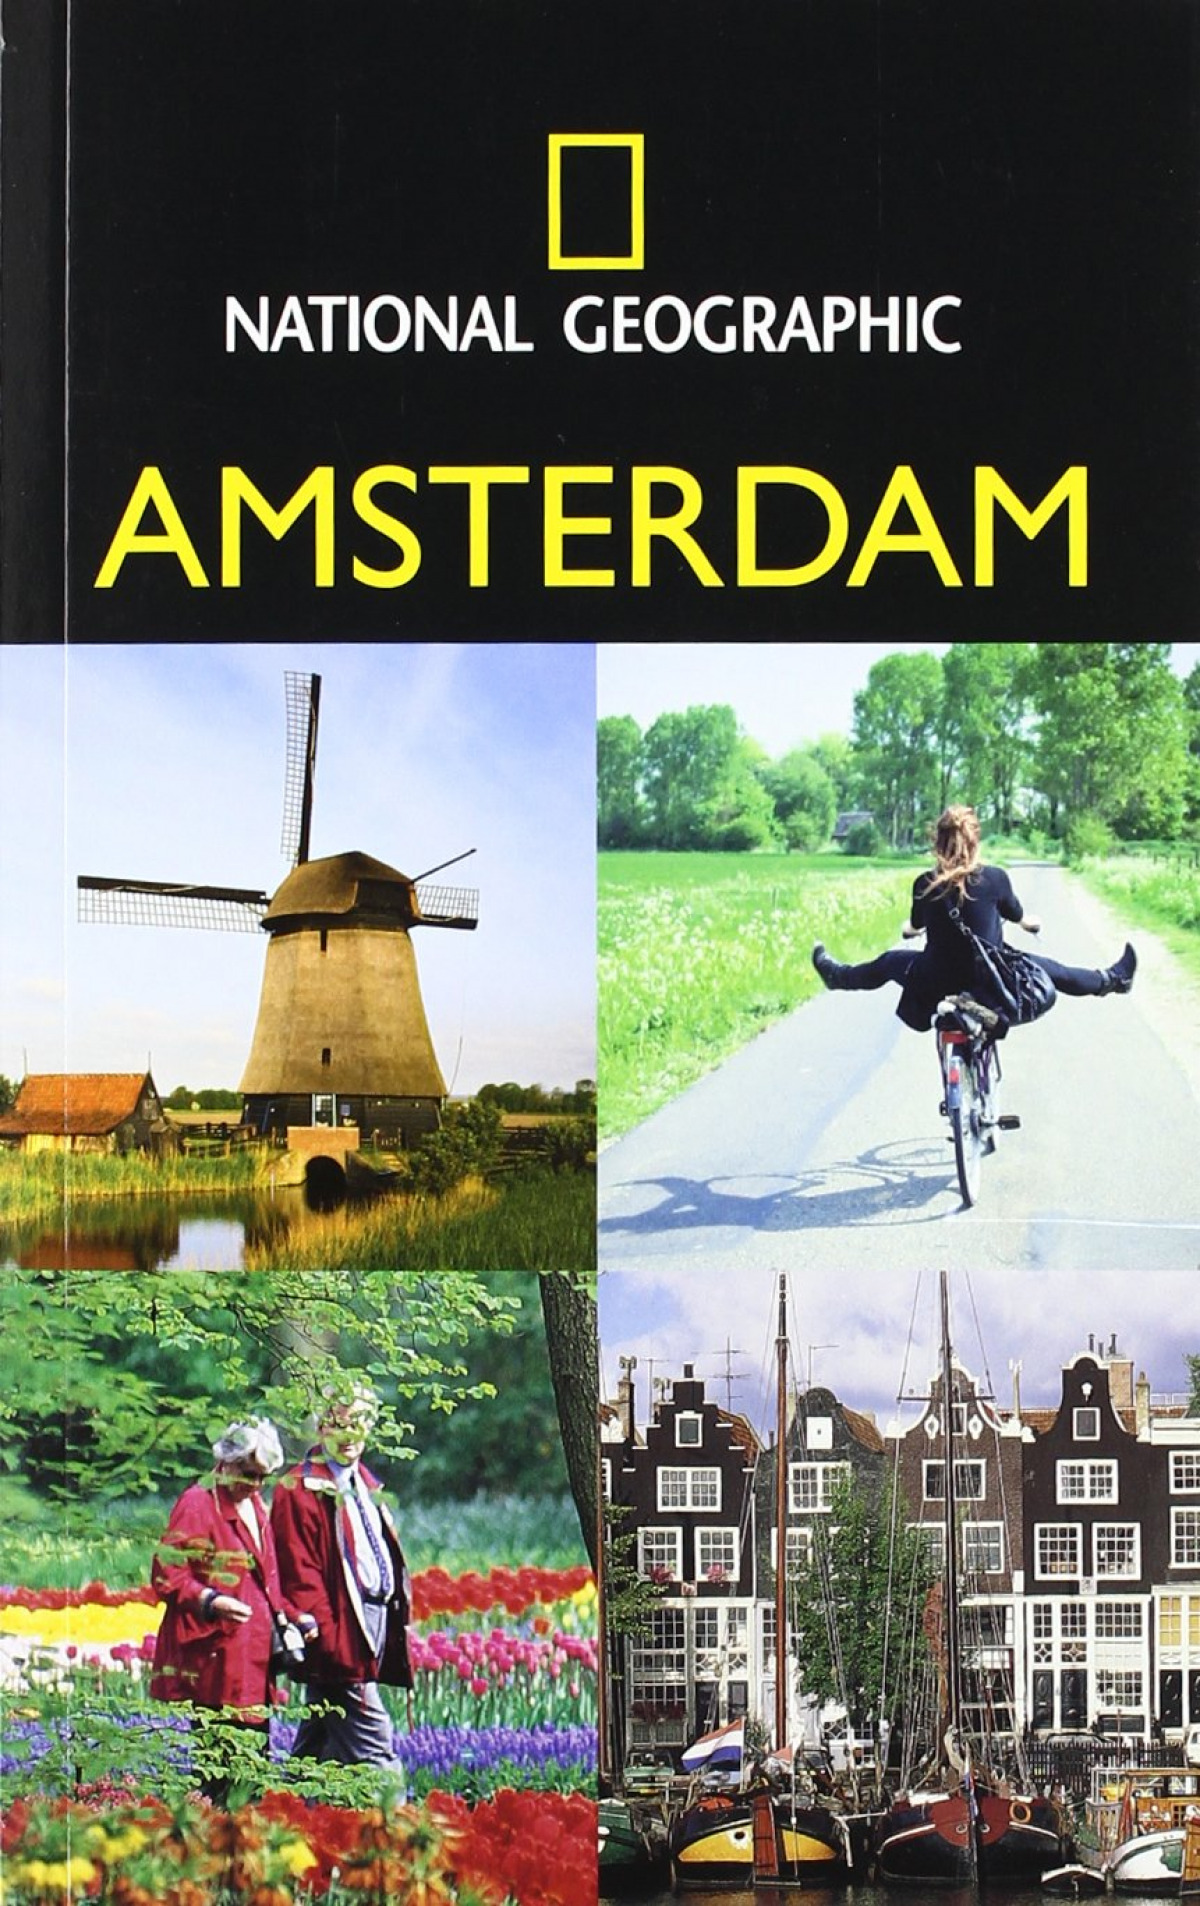 Guia National Amsterdam 2012 - Geographic , National